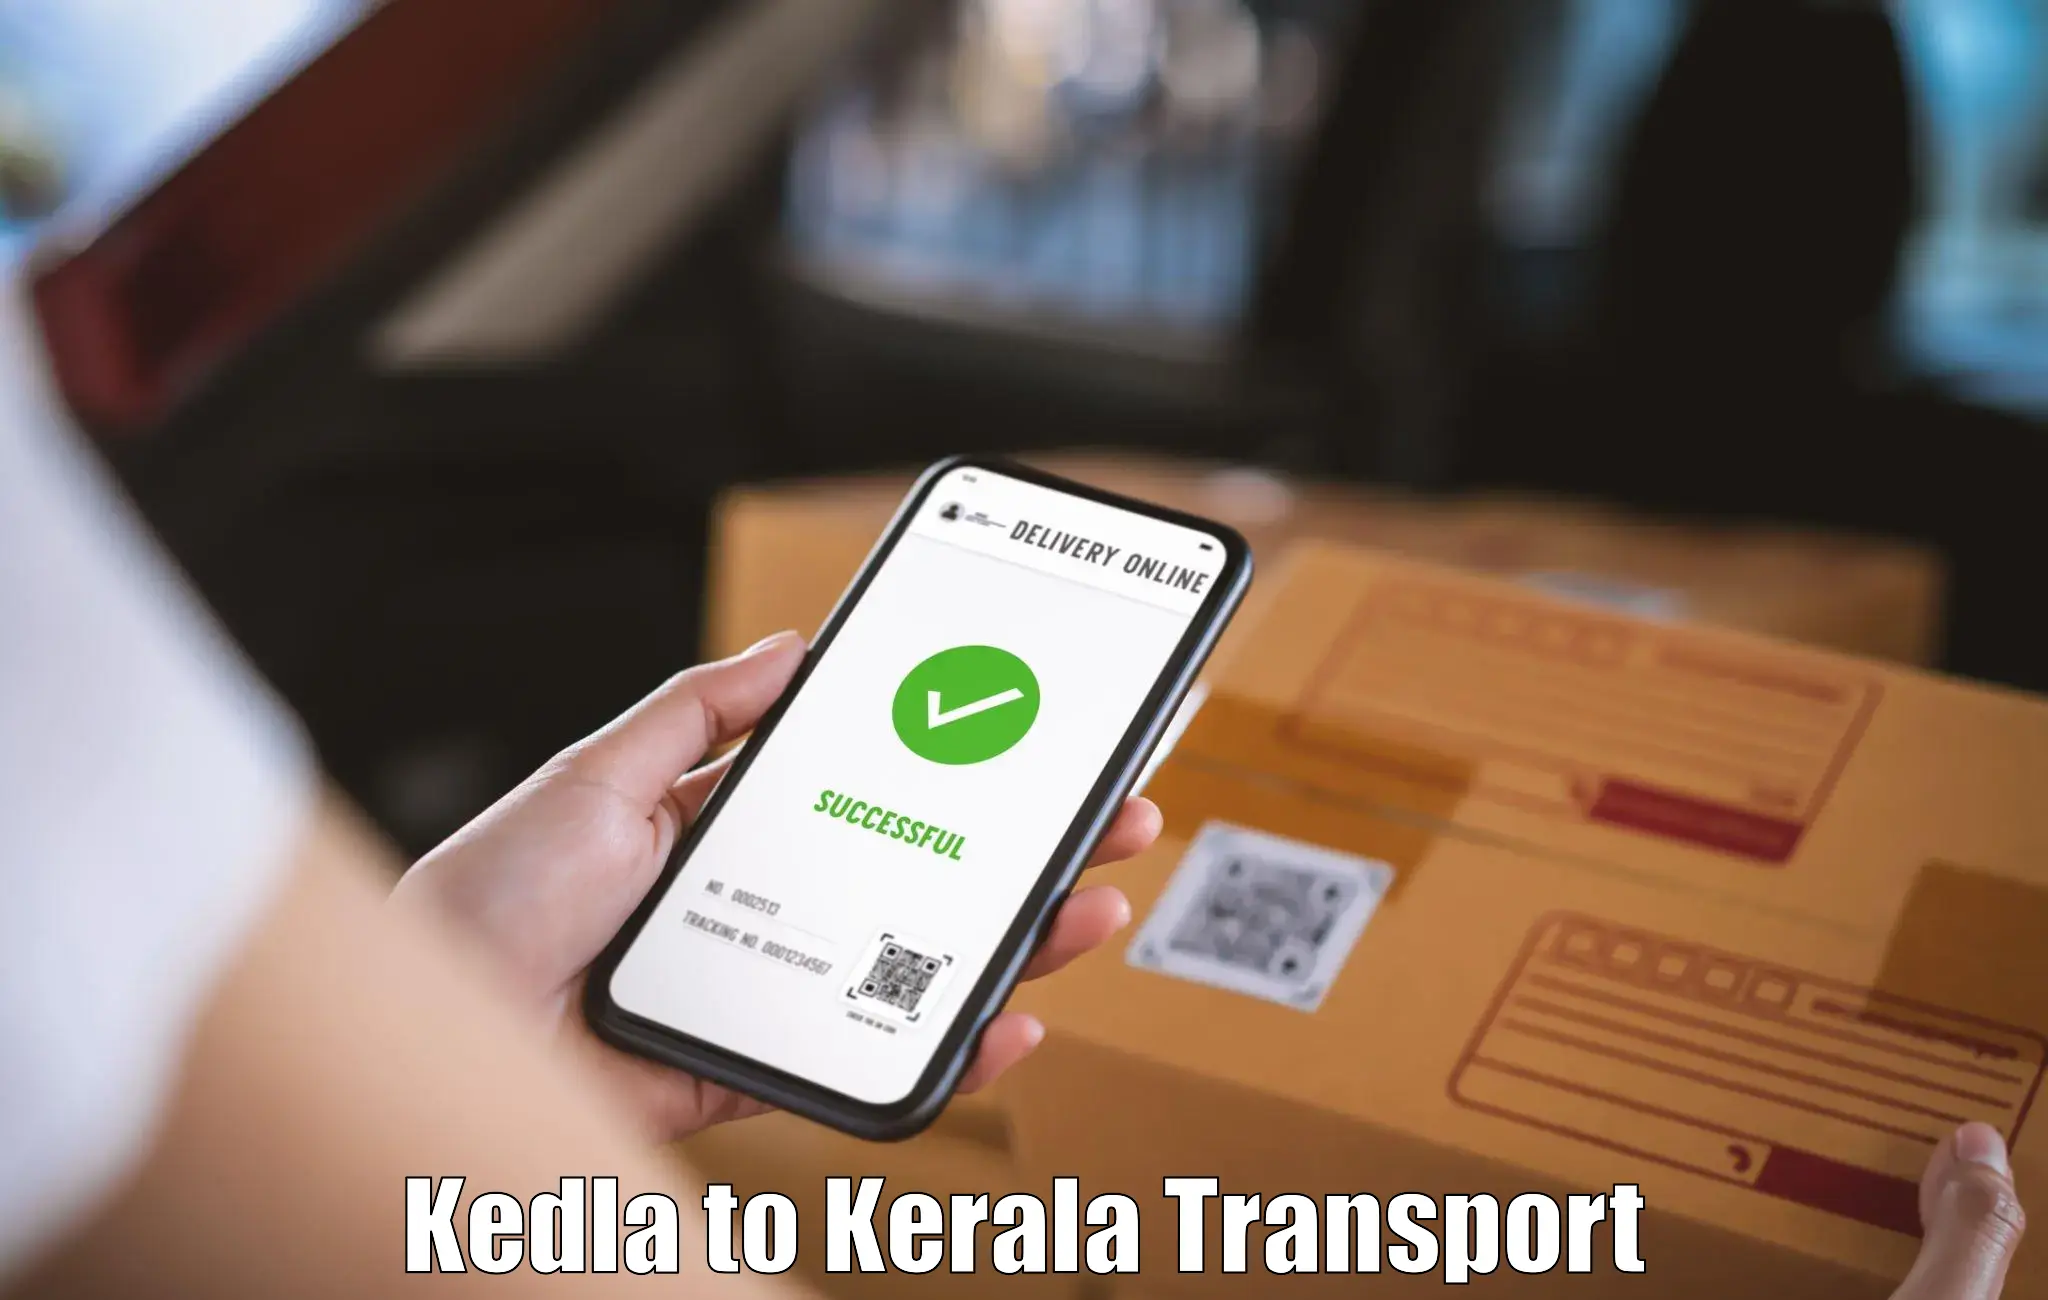 Package delivery services Kedla to Koyilandy